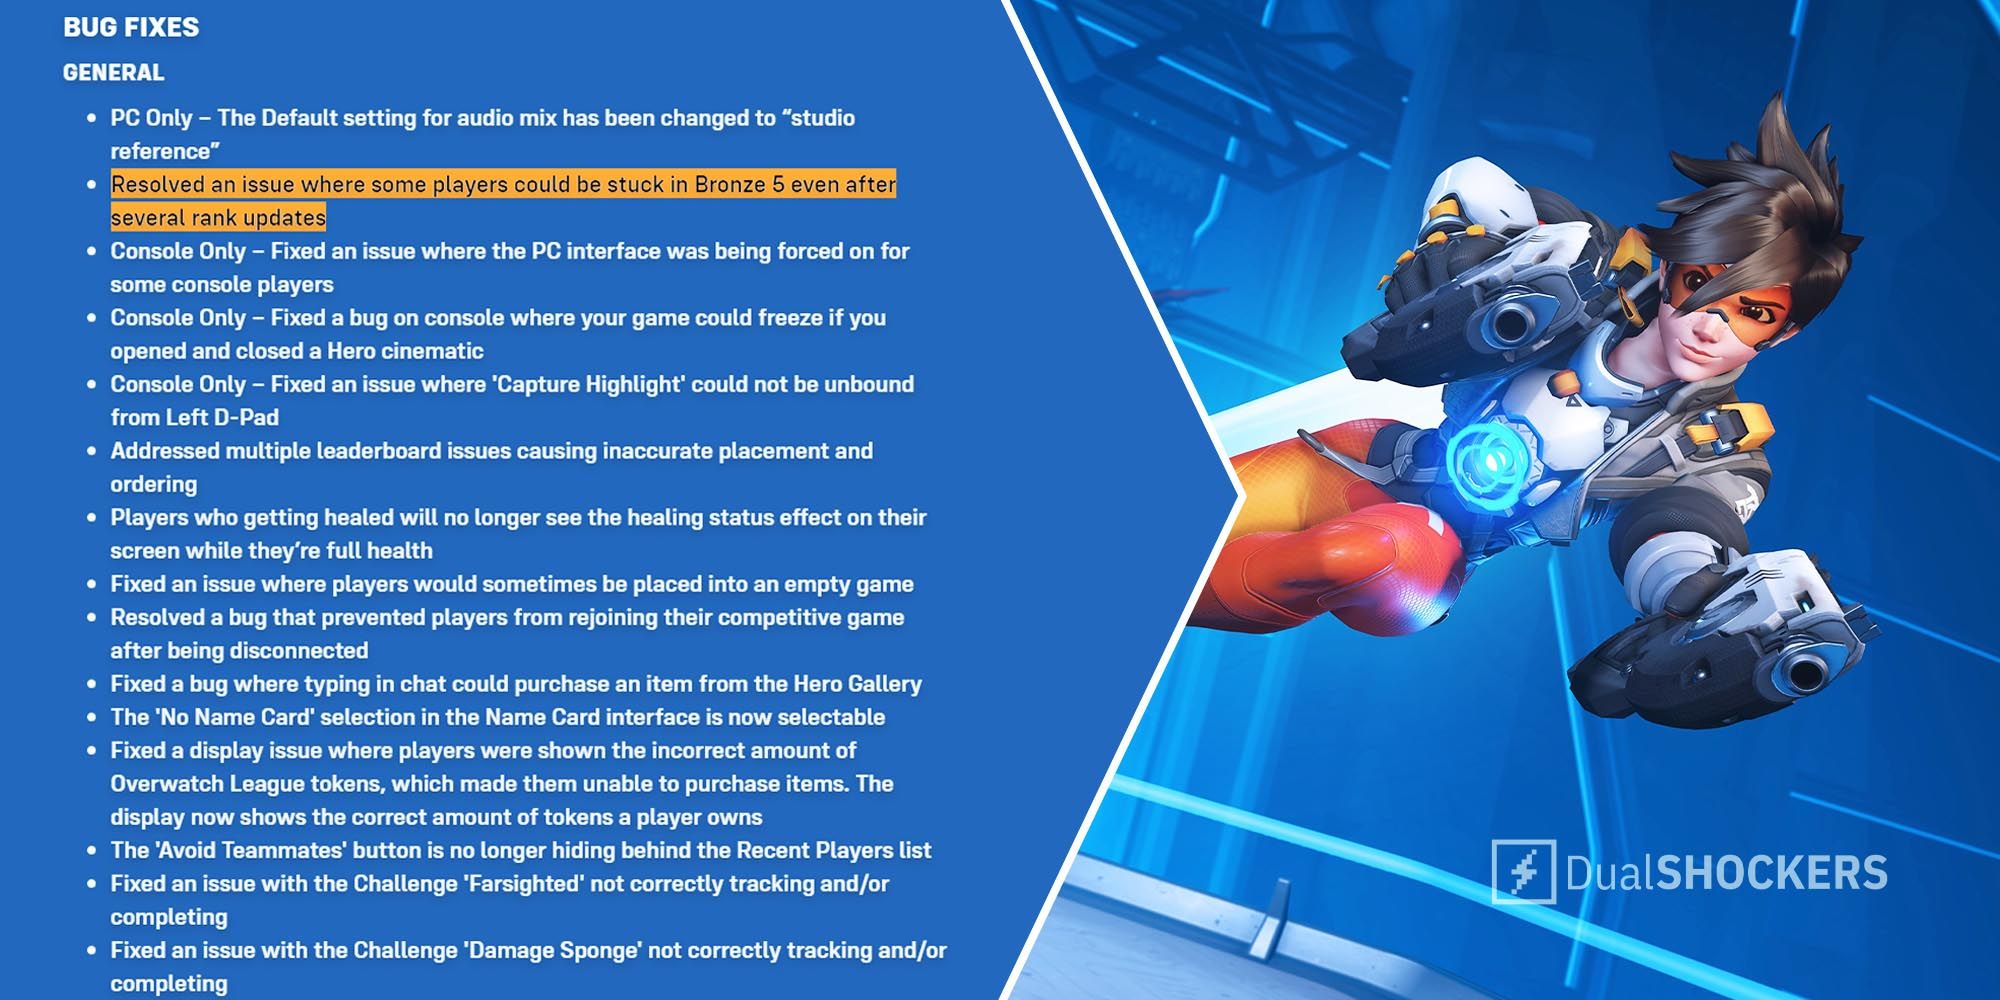 Overwatch 2 patch notes including the major Bronze 5 bug with Tracer aiming weapons at the screen